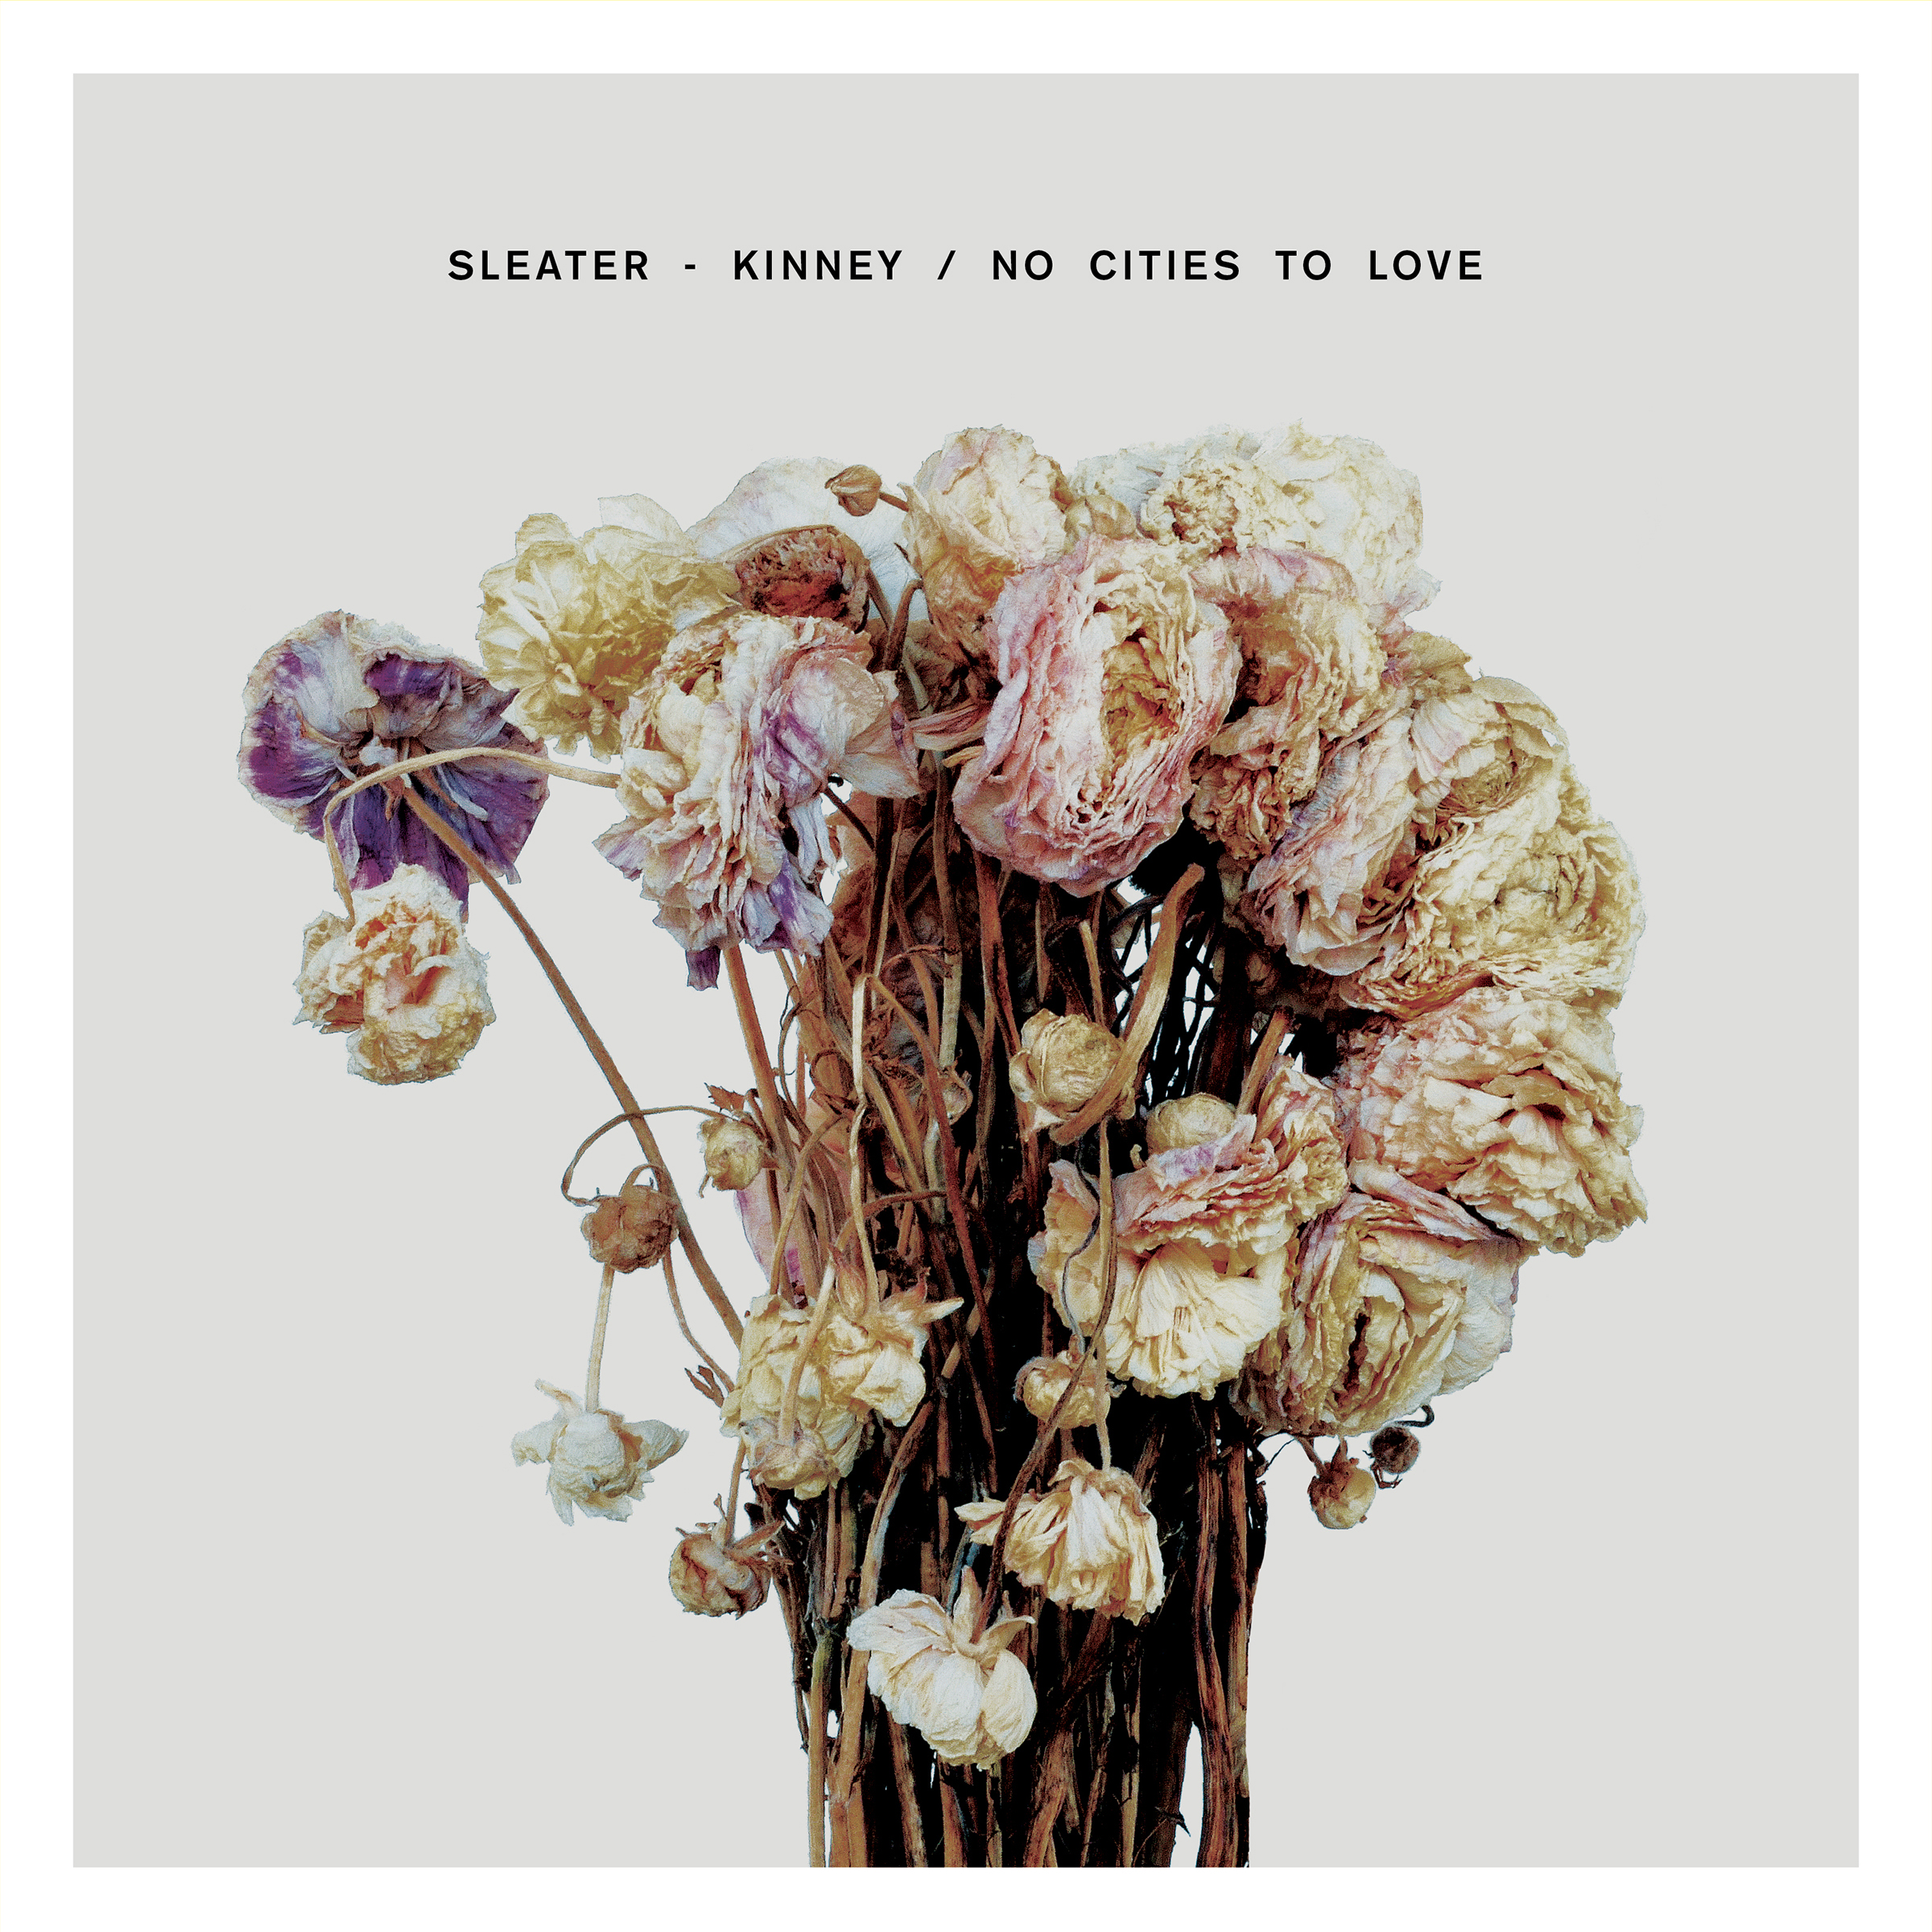 25. SLEATER-KINNEY | "NO CITIES TO LOVE"